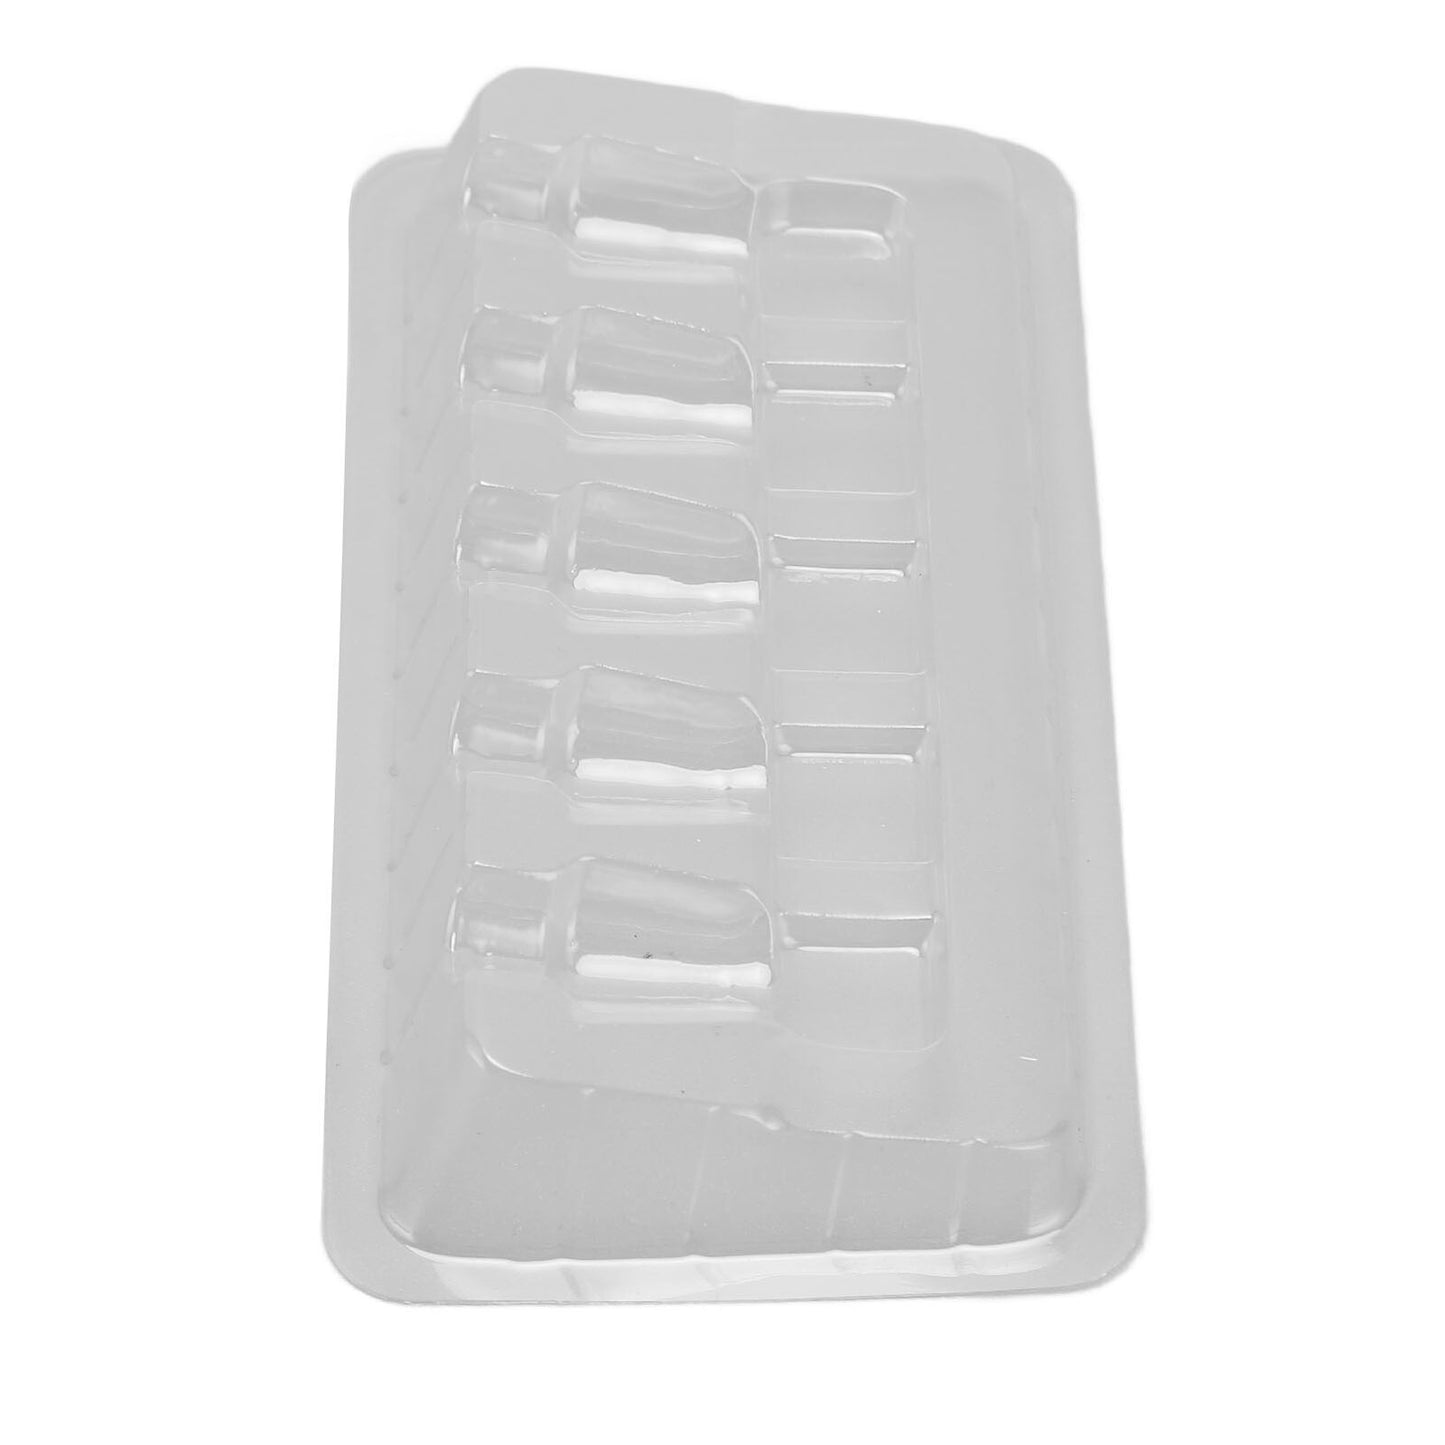 High-quality, clear plastic disposable tray for tattoo cartridges